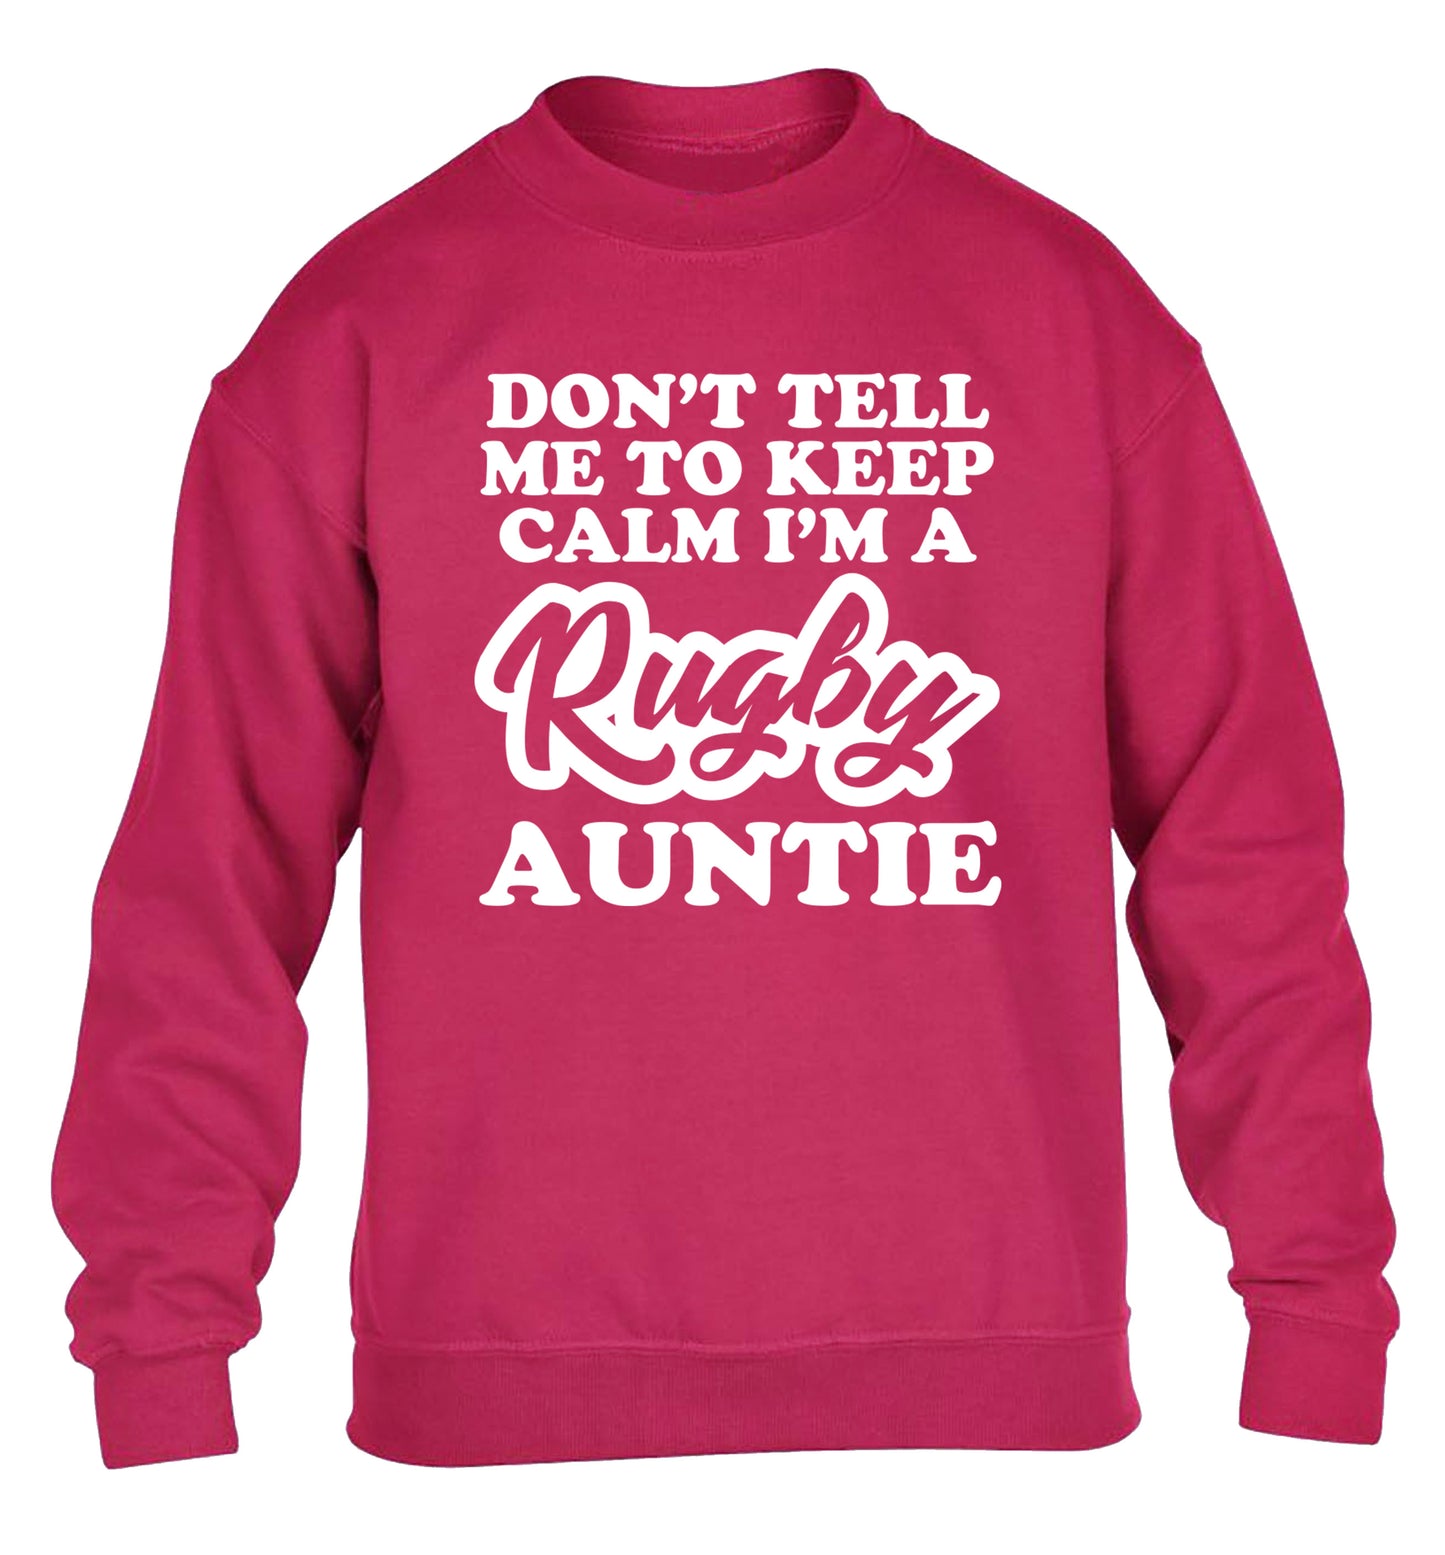 Don't tell me keep calm I'm a rugby auntie children's pink sweater 12-13 Years